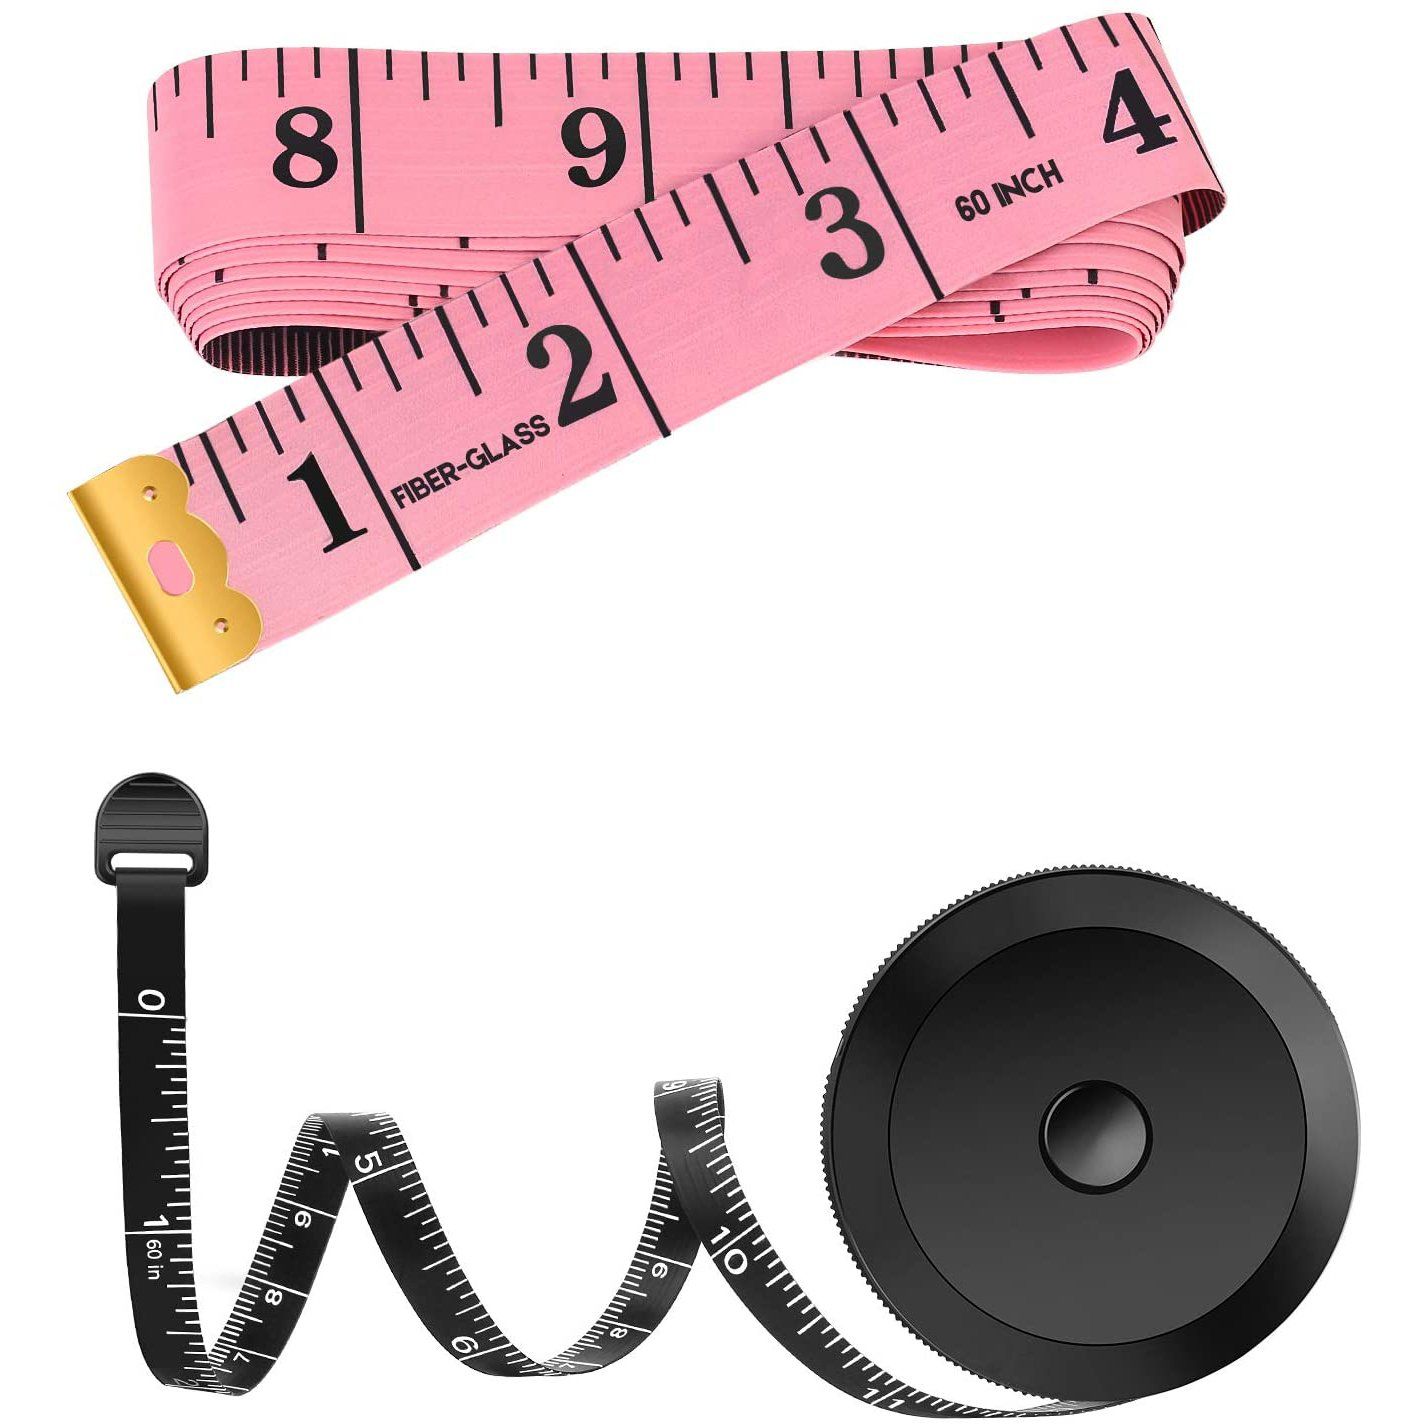  Body Tape Measure, 4PCS Measuring Tape for Body 60 Inch(150cm),  Retractable Soft Body Measurement Tape for Weight Loss, Fitness, Tailoring,  Sewing, Crafting Clothes, Black+ Yellow : Tools & Home Improvement